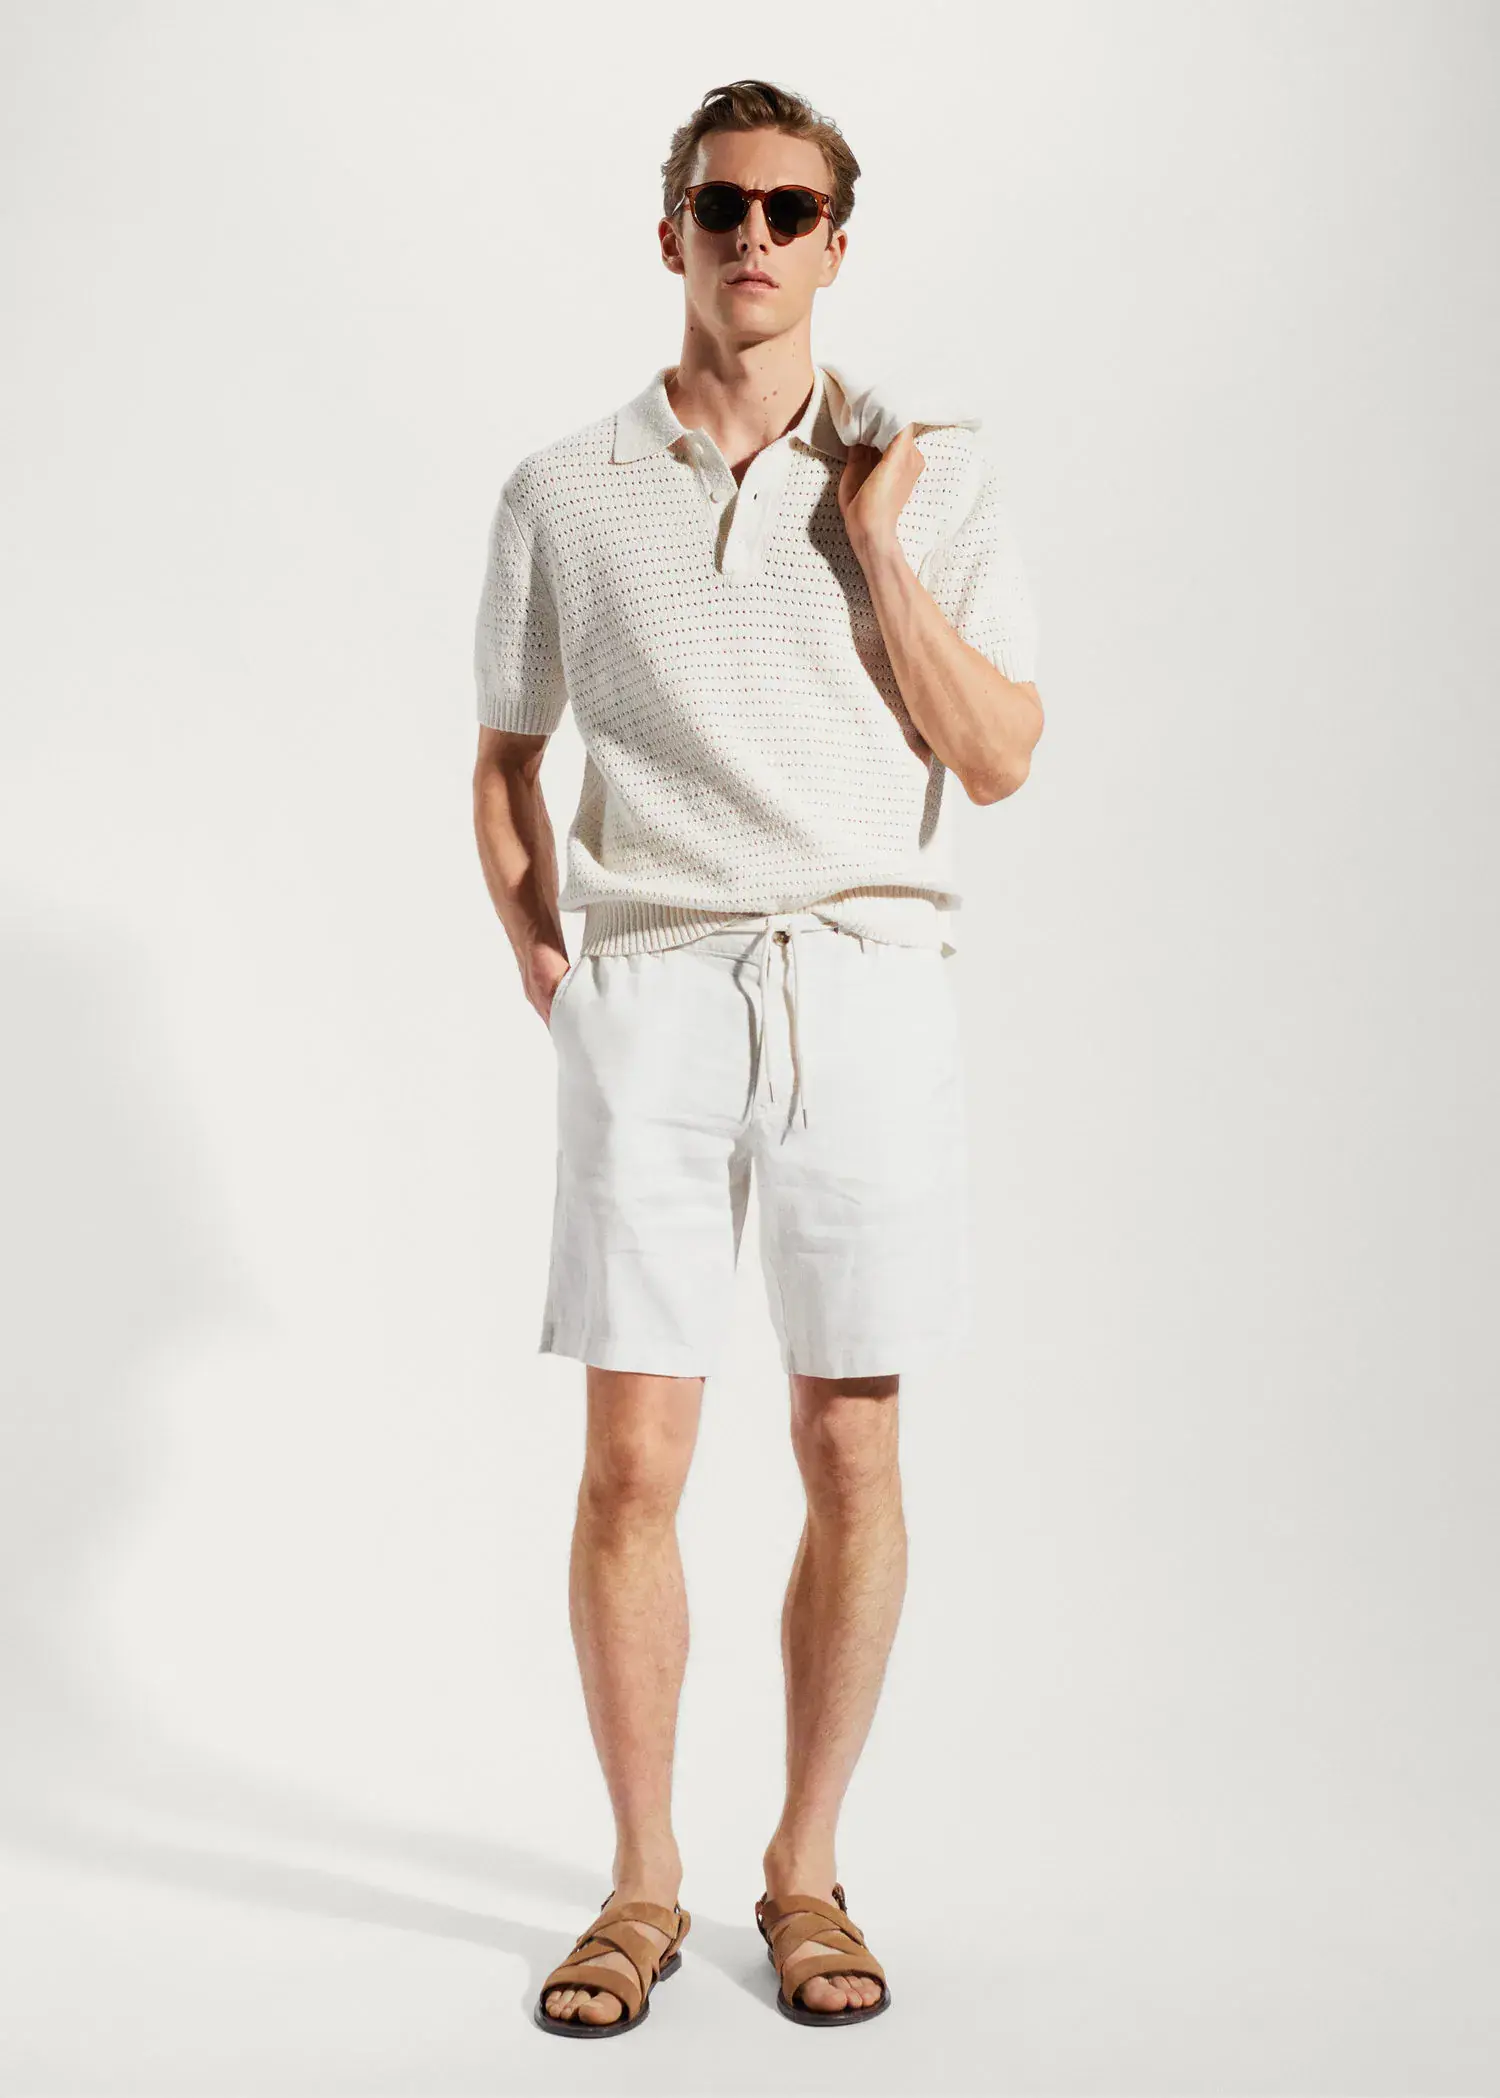 Mango 100% linen bermuda shorts with drawstring. a man in white shorts and a white polo shirt. 